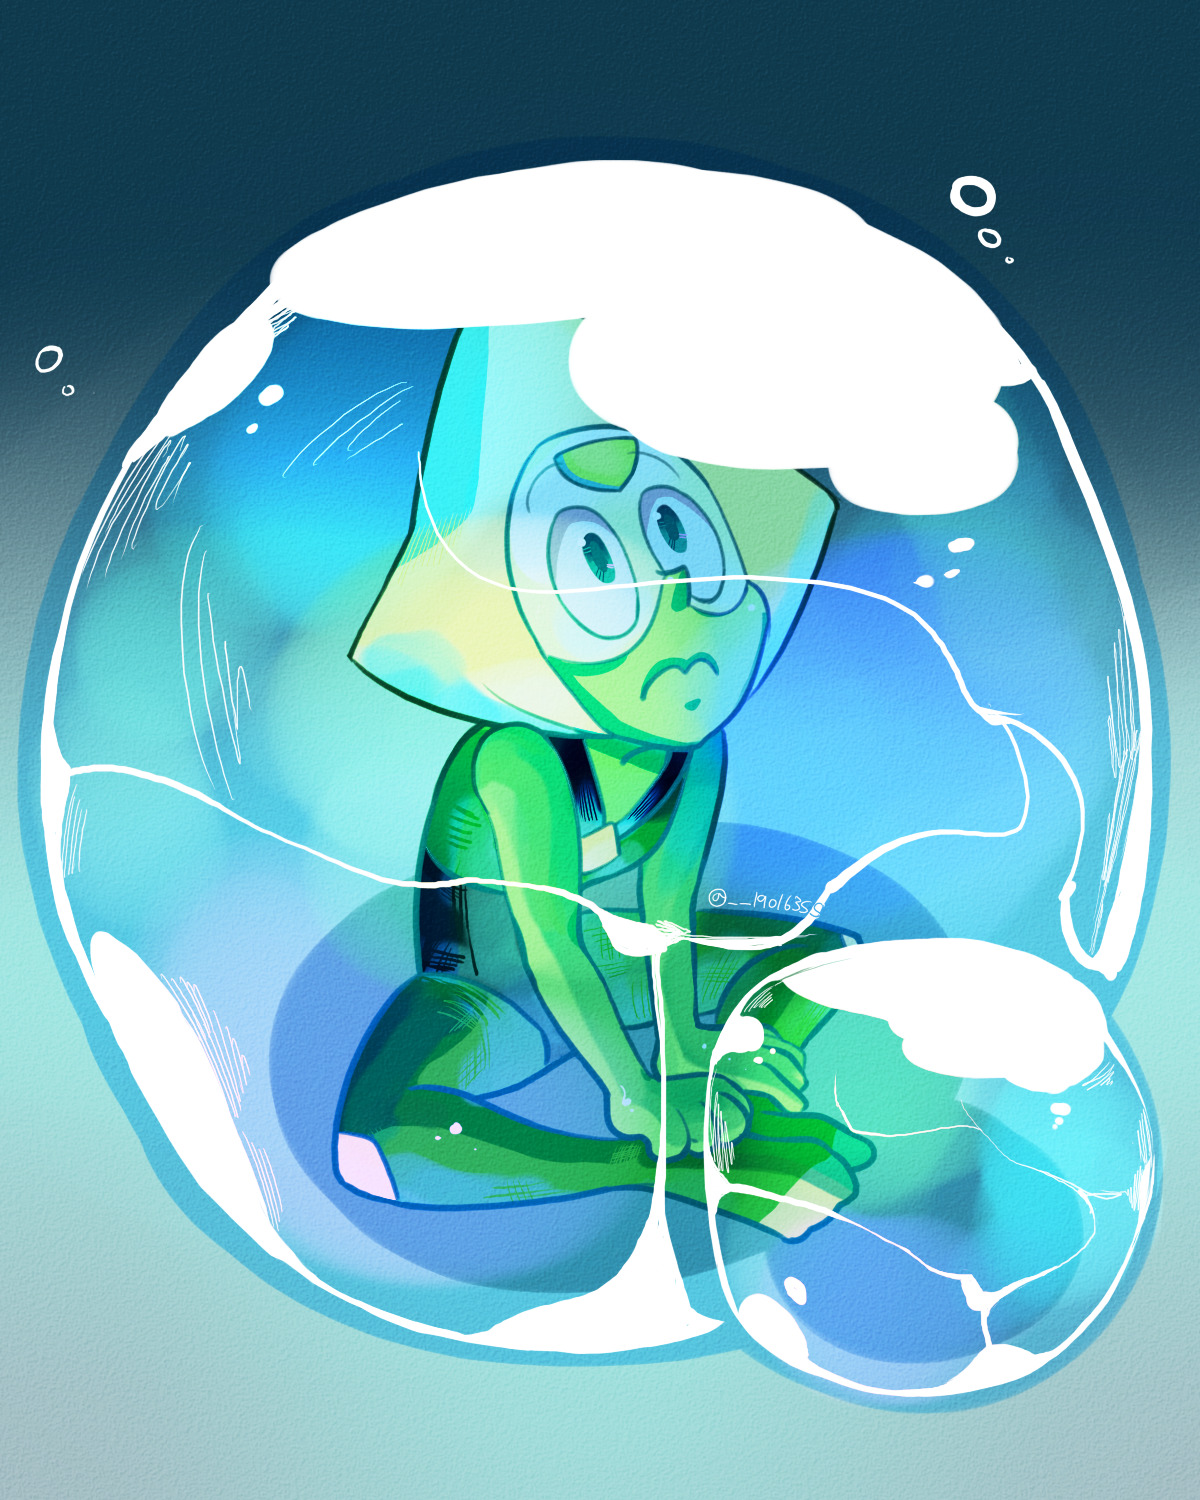 Is Peridot waiting for someone? or..